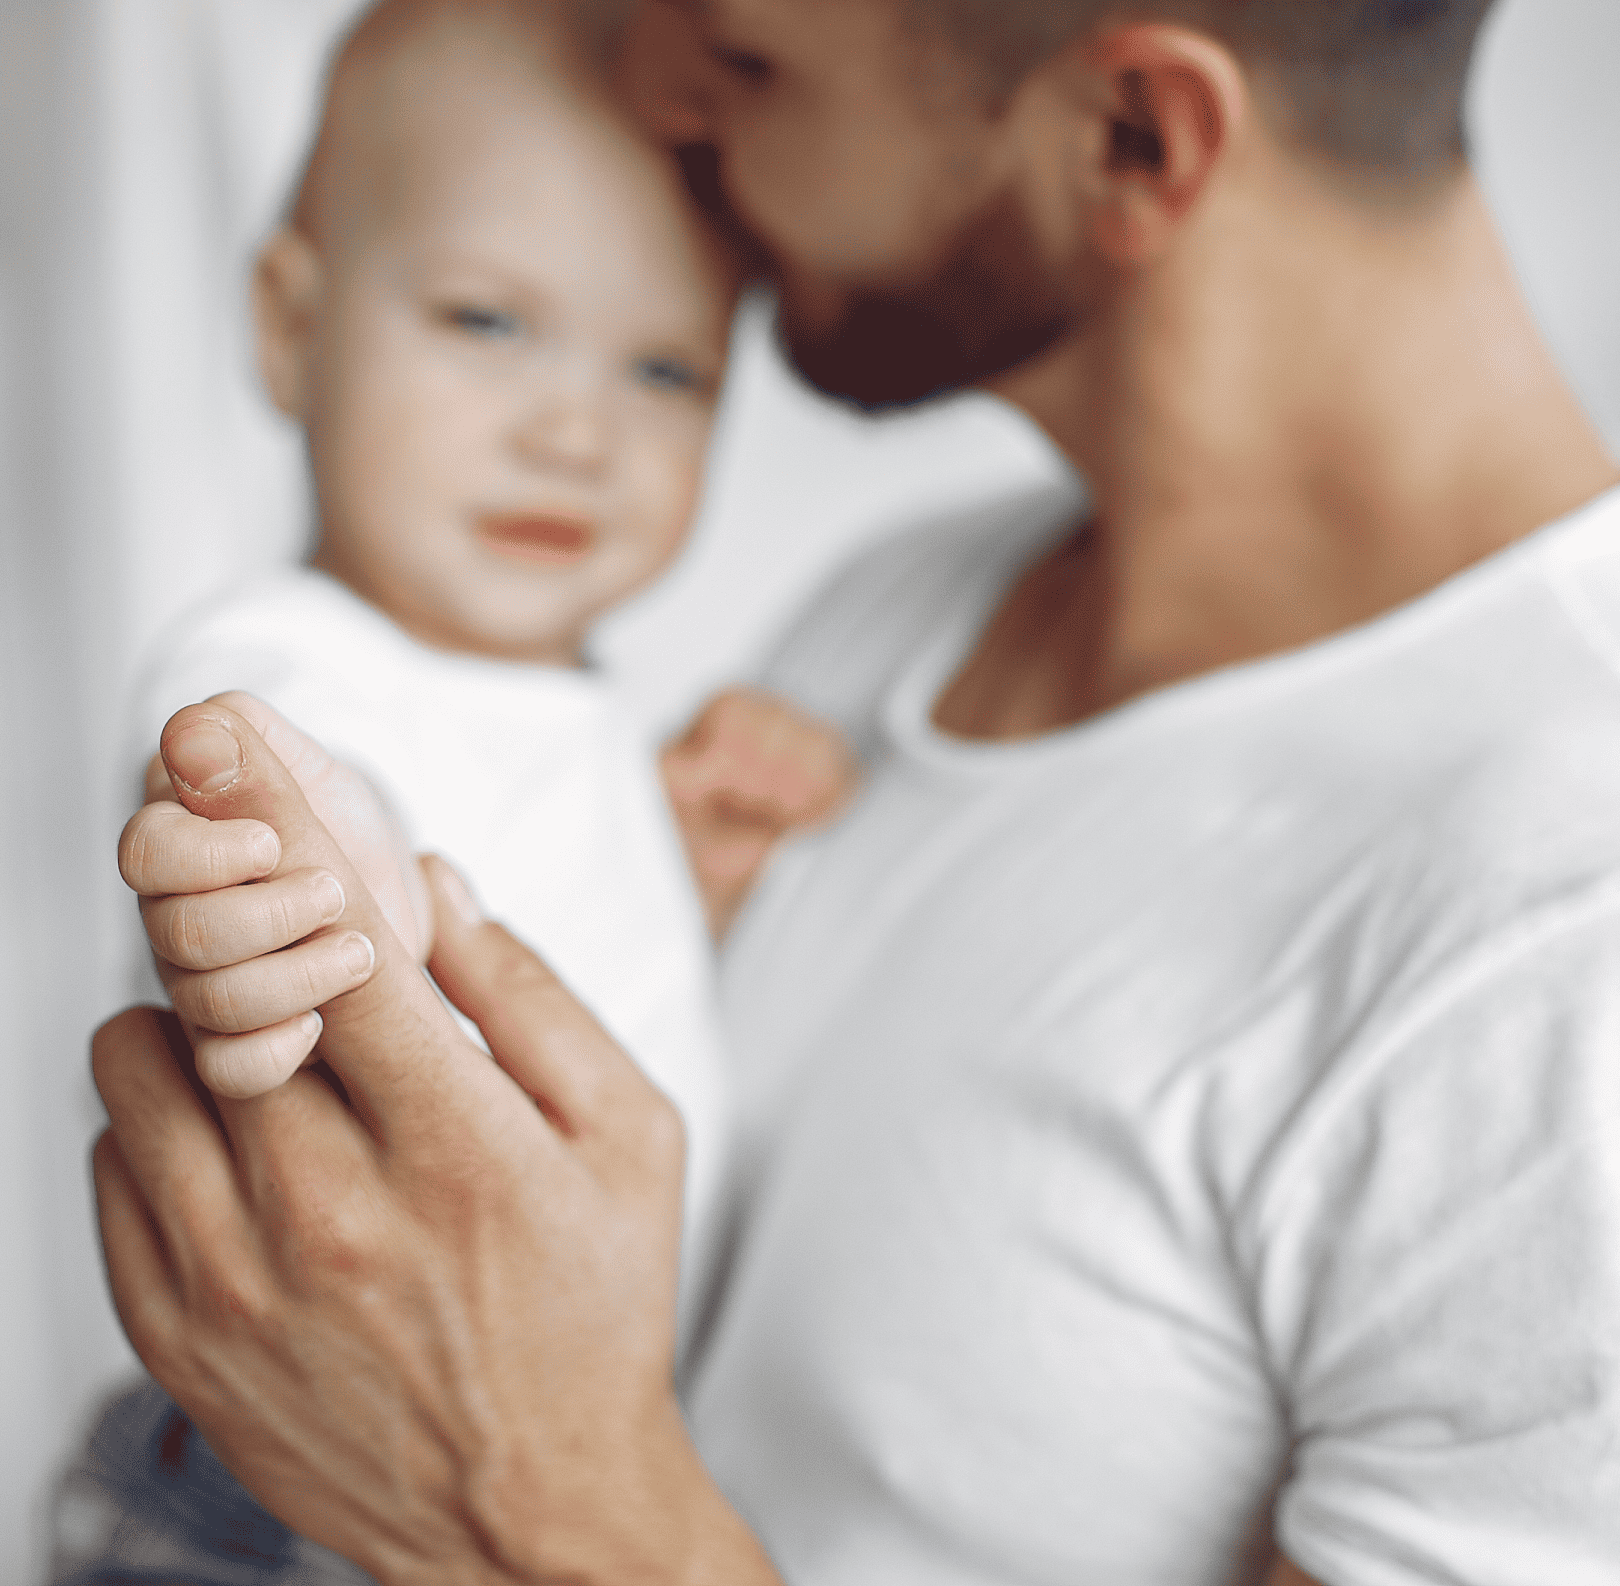 Father gently holding his baby's hand, kissing the baby's head